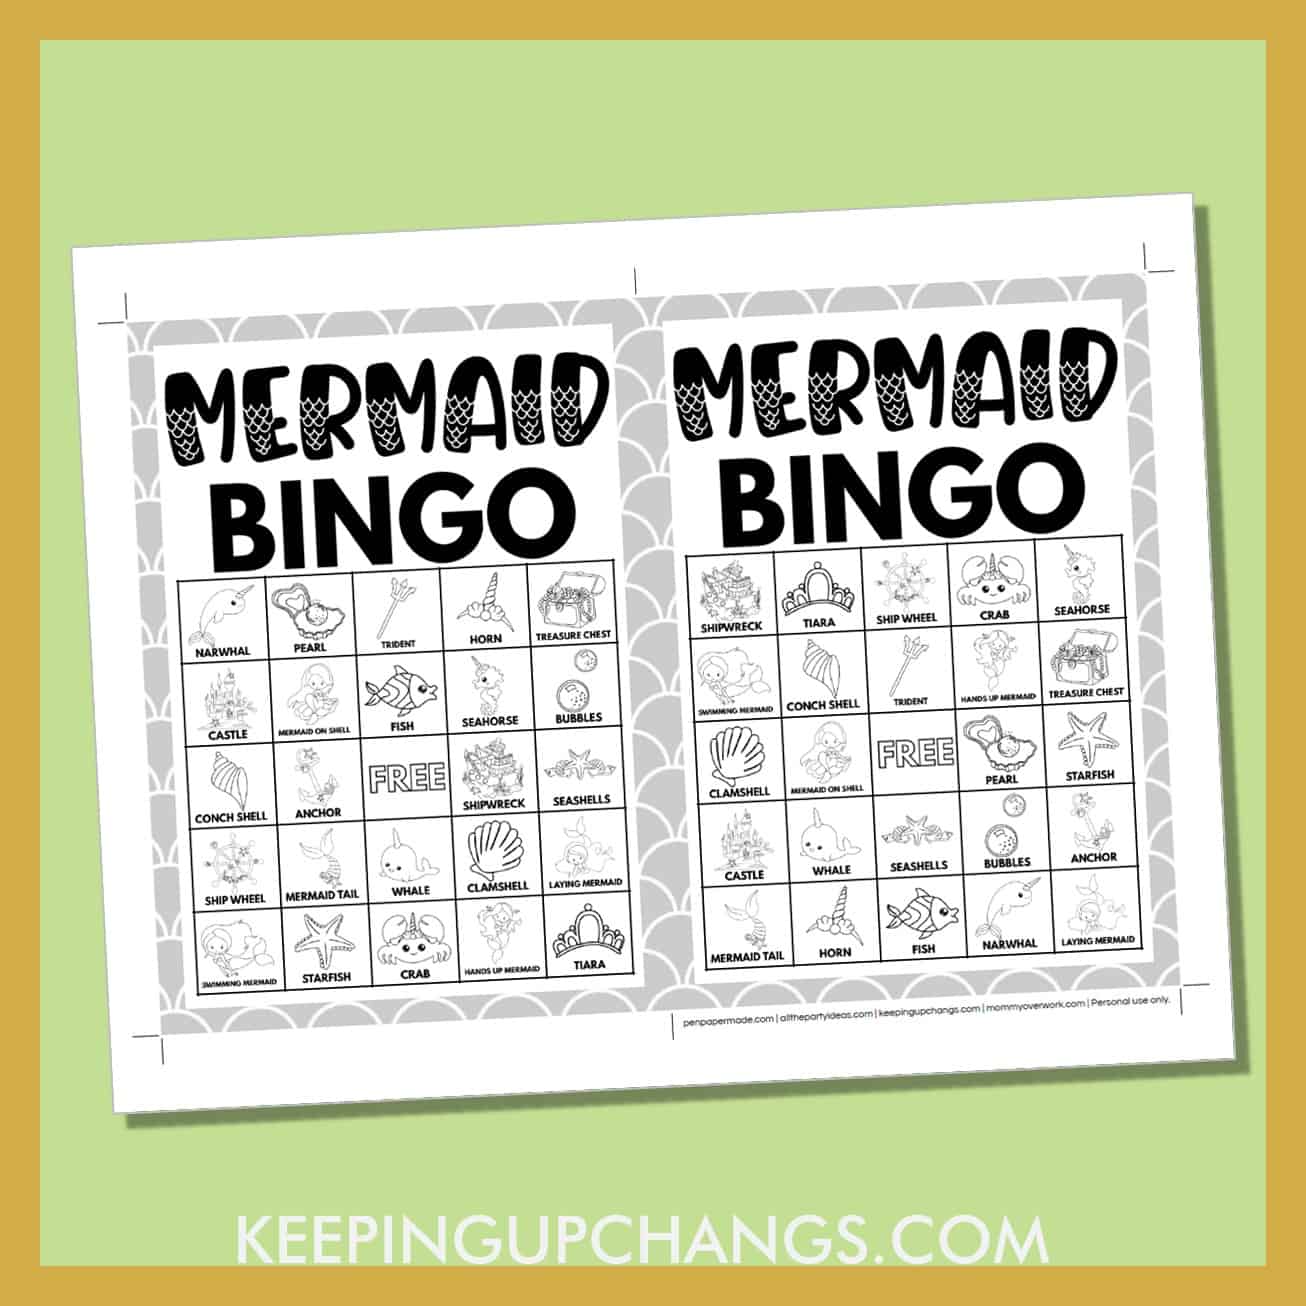 free mermaid bingo card 5x5 5x7 game boards with black, white images and text words.